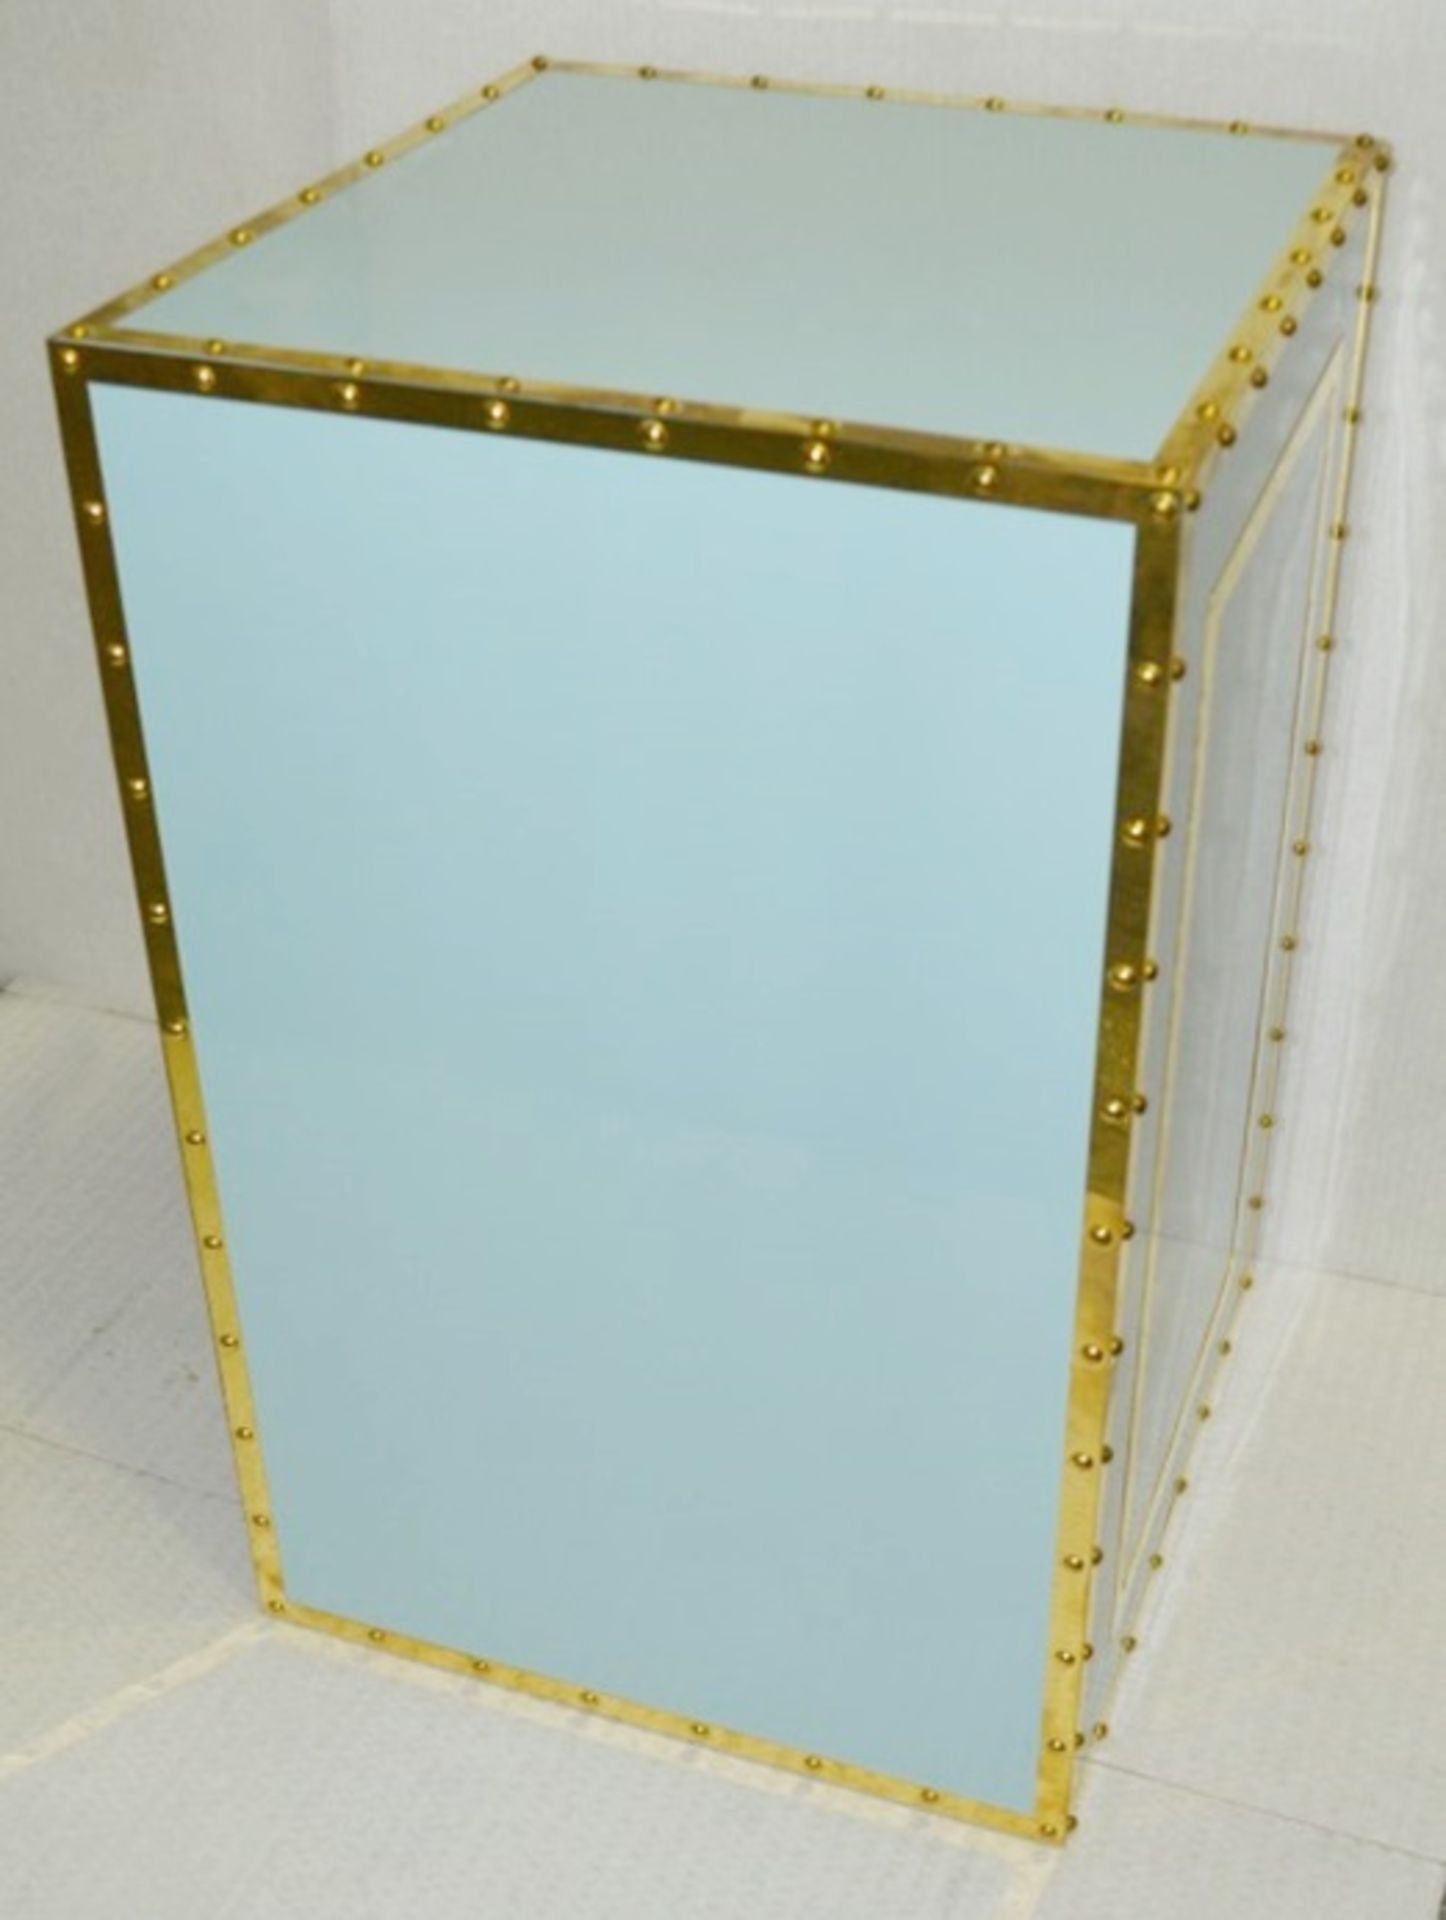 1 x Opulent Bank Vault Safe-style Shop Display Plinth In Tiffany Blue With Gold Trim - Image 6 of 6